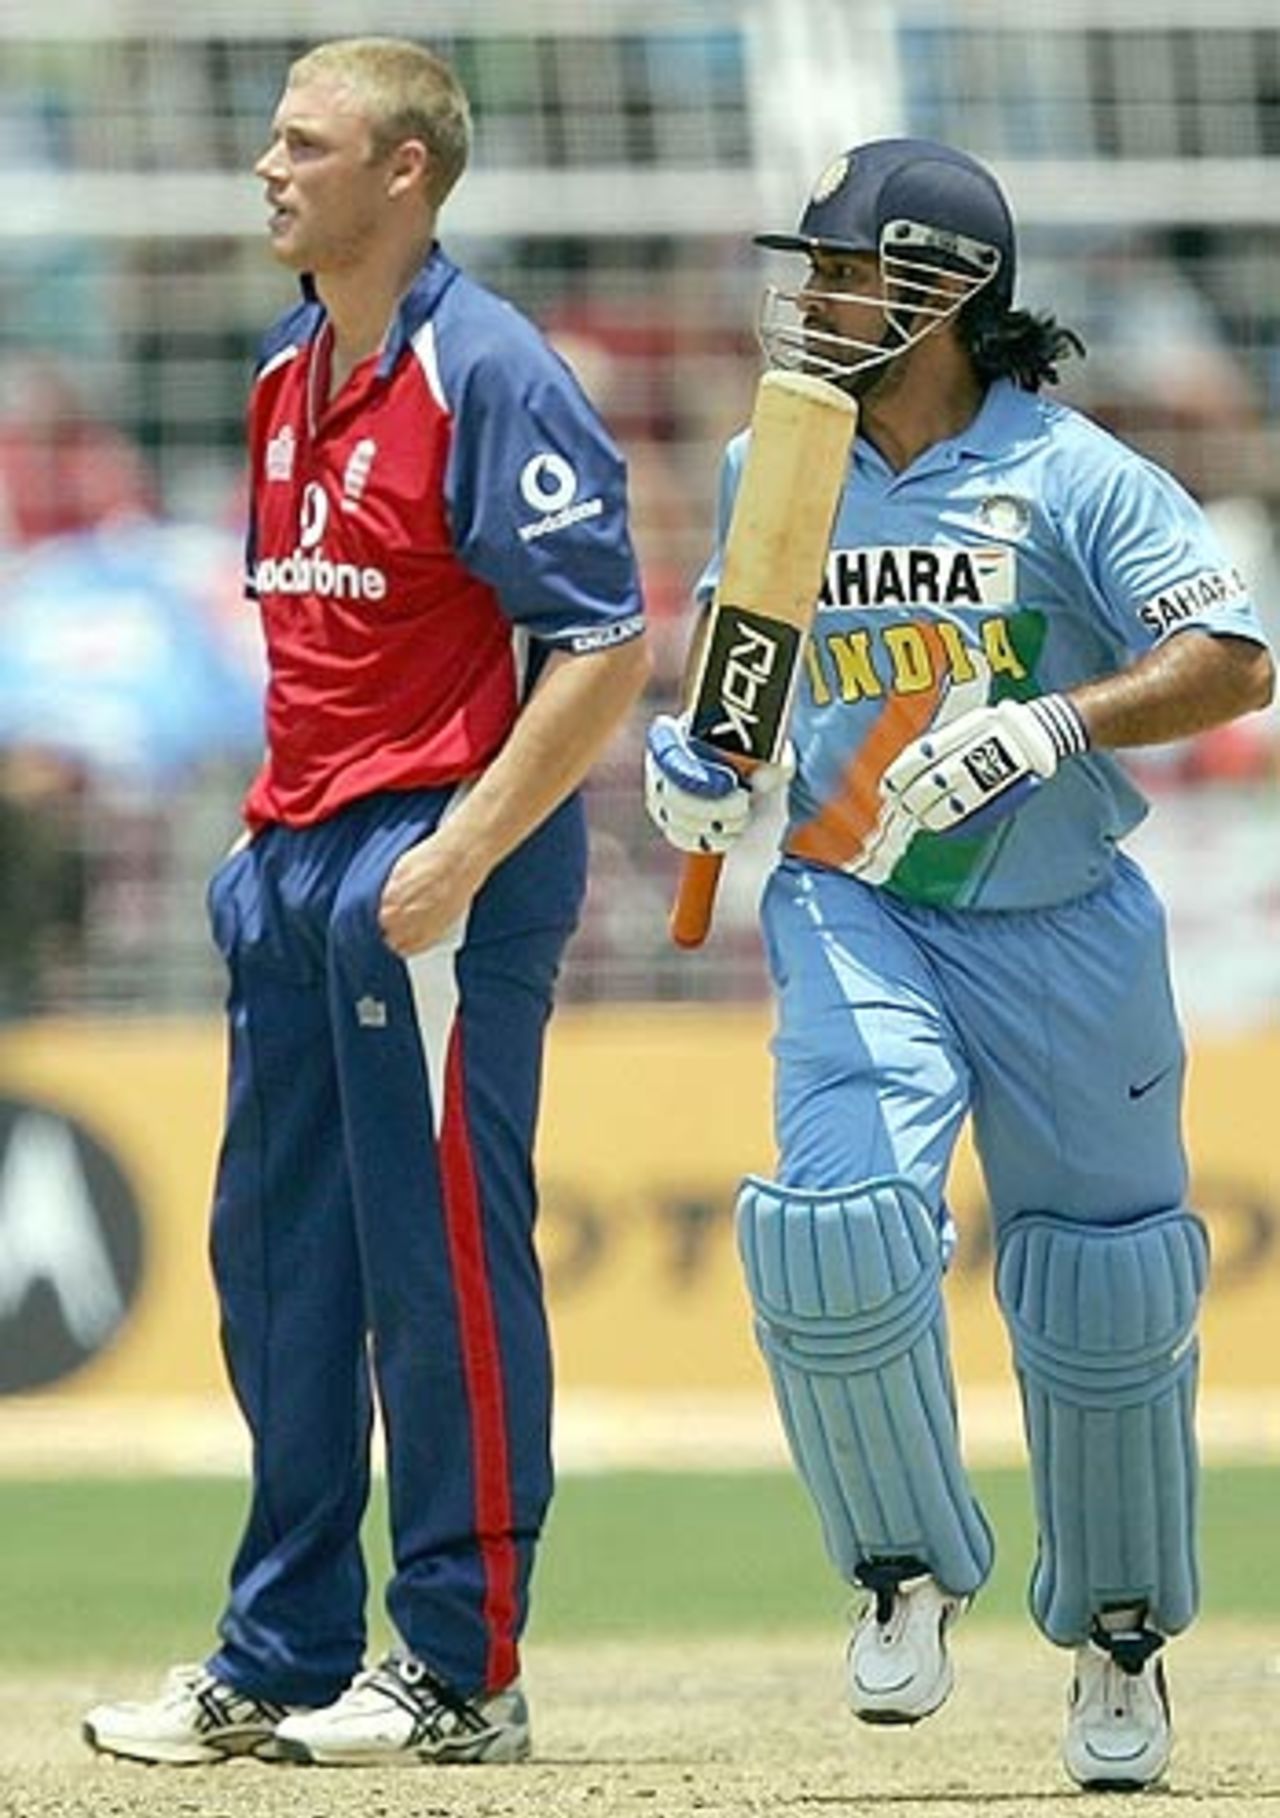 Andrew Flintoff looks on as Mahendra Singh Dhoni pinches a run, India v England, 3rd ODI, Goa, April 3, 2006